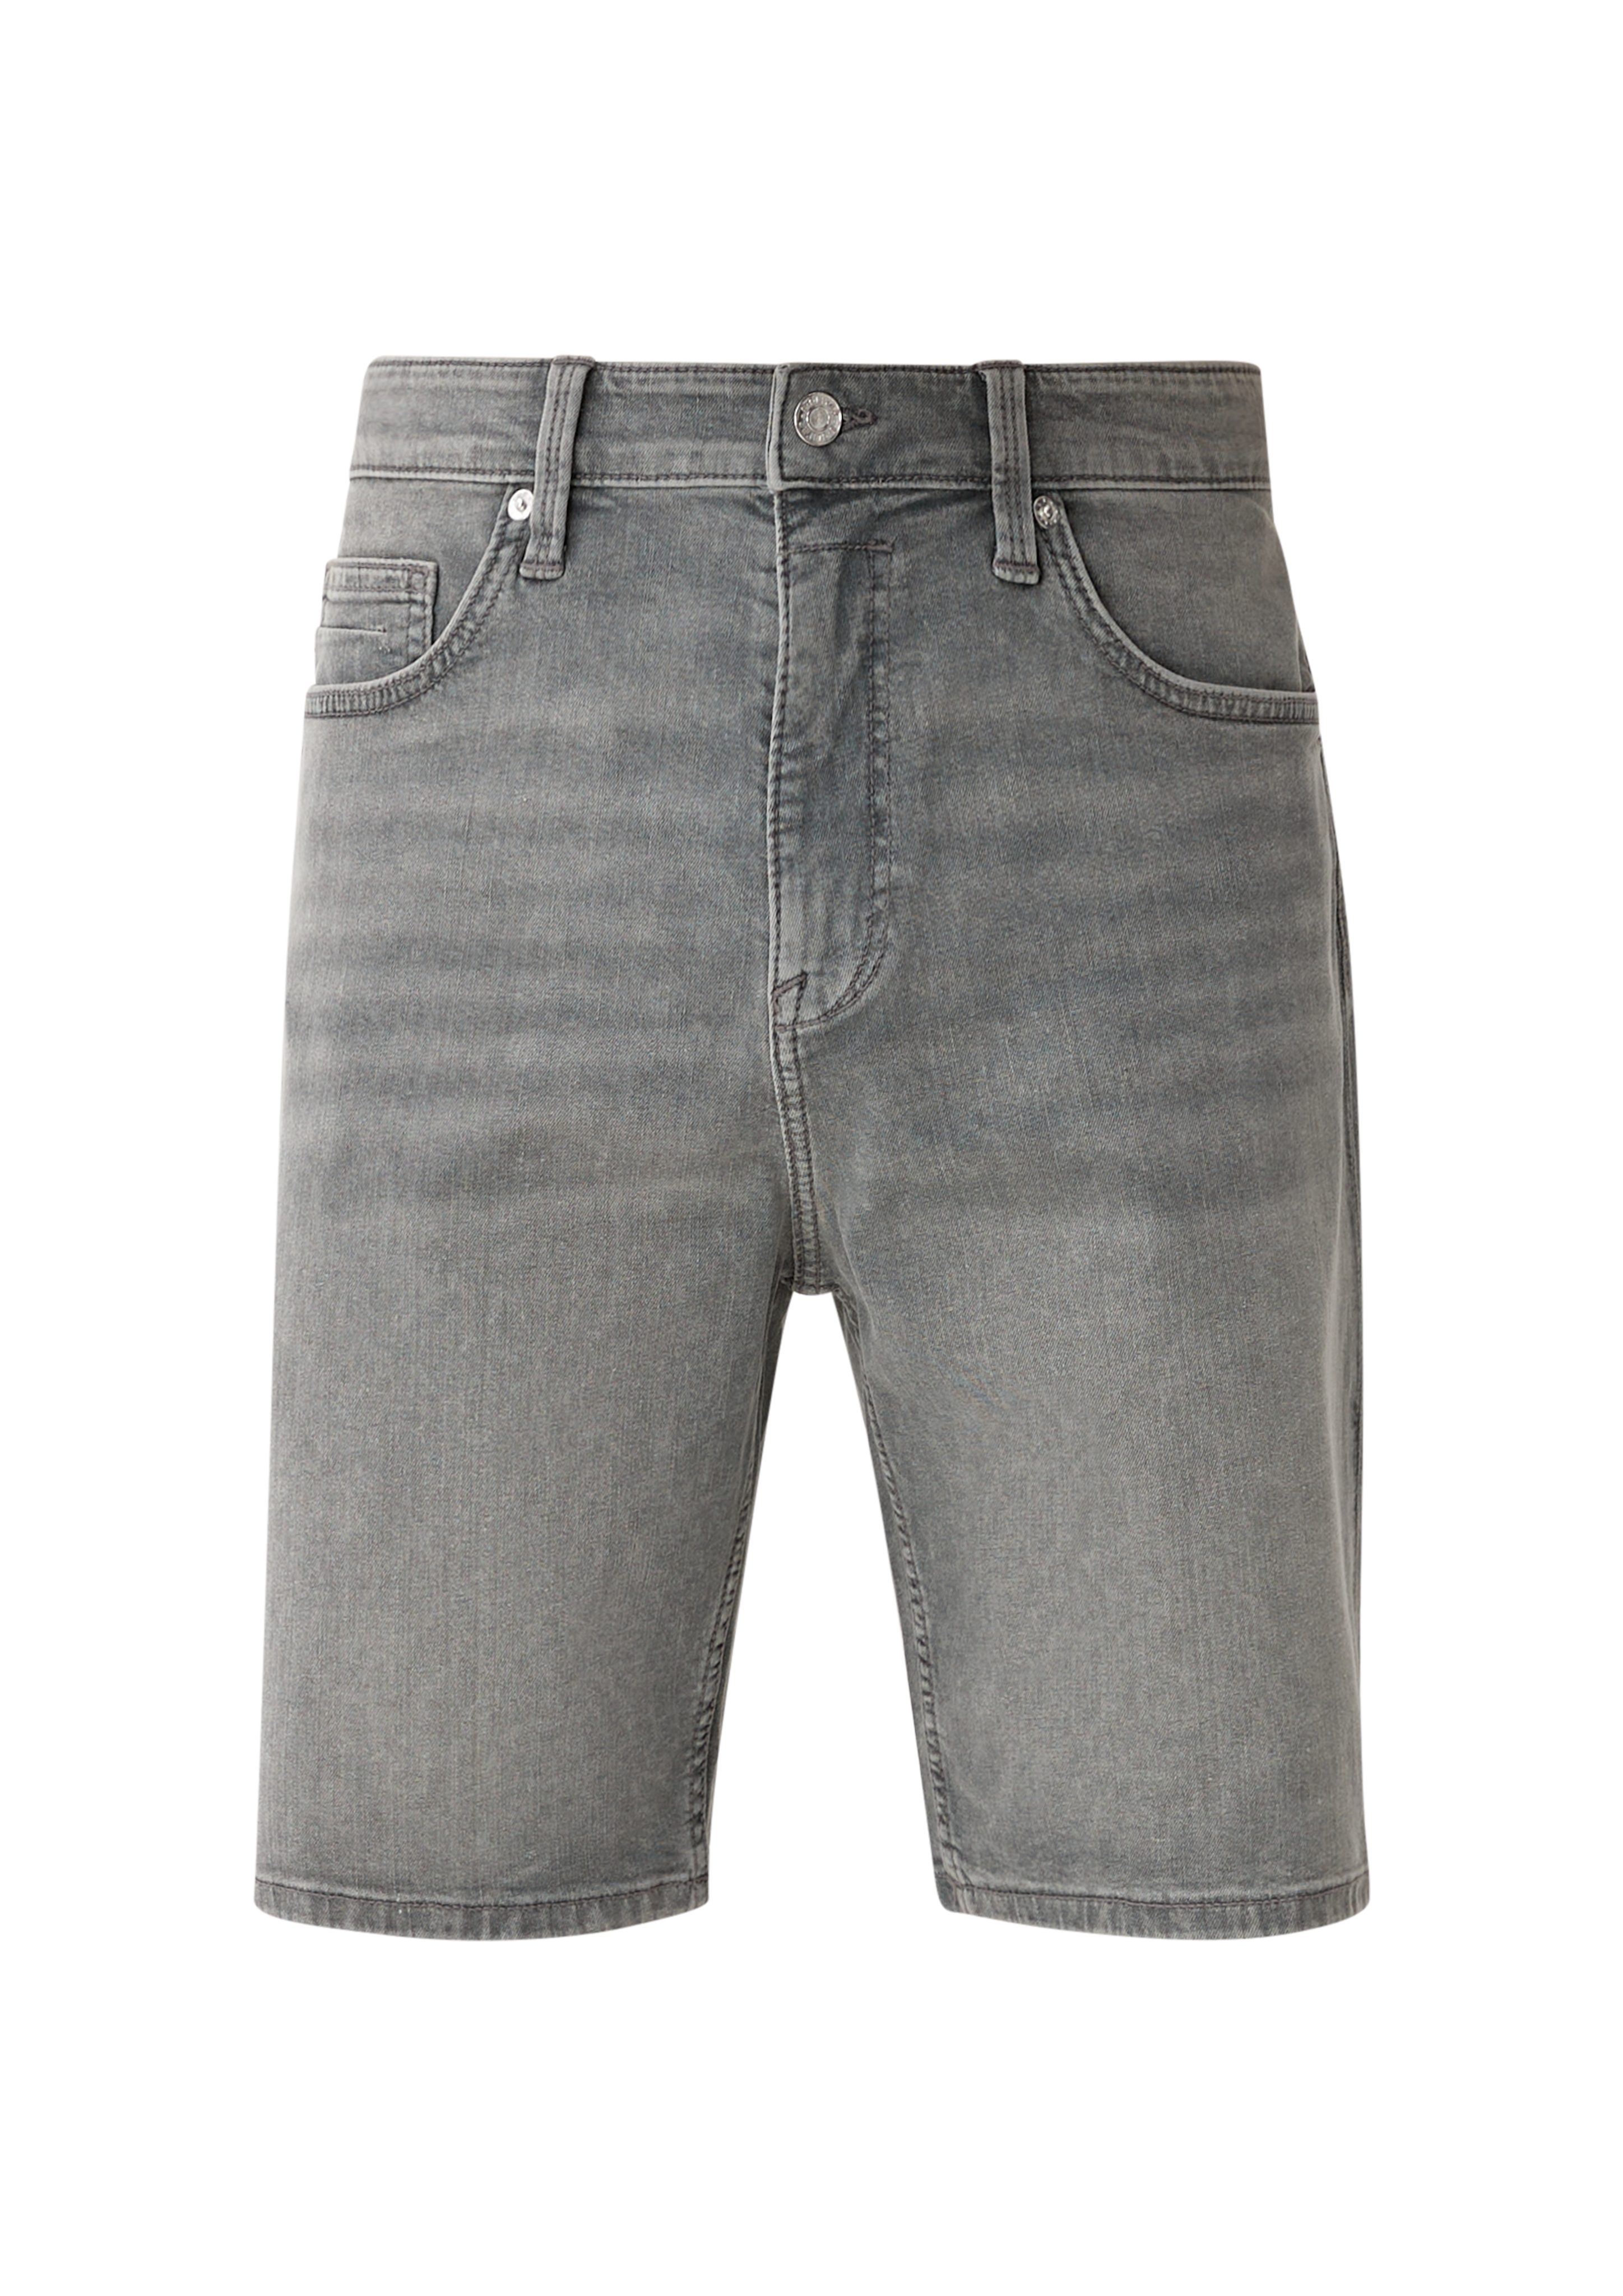 Slim / Rise Keith Mid s.Oliver Leg Fit steingrau Waschung Straight / Jeansshorts / Jeans